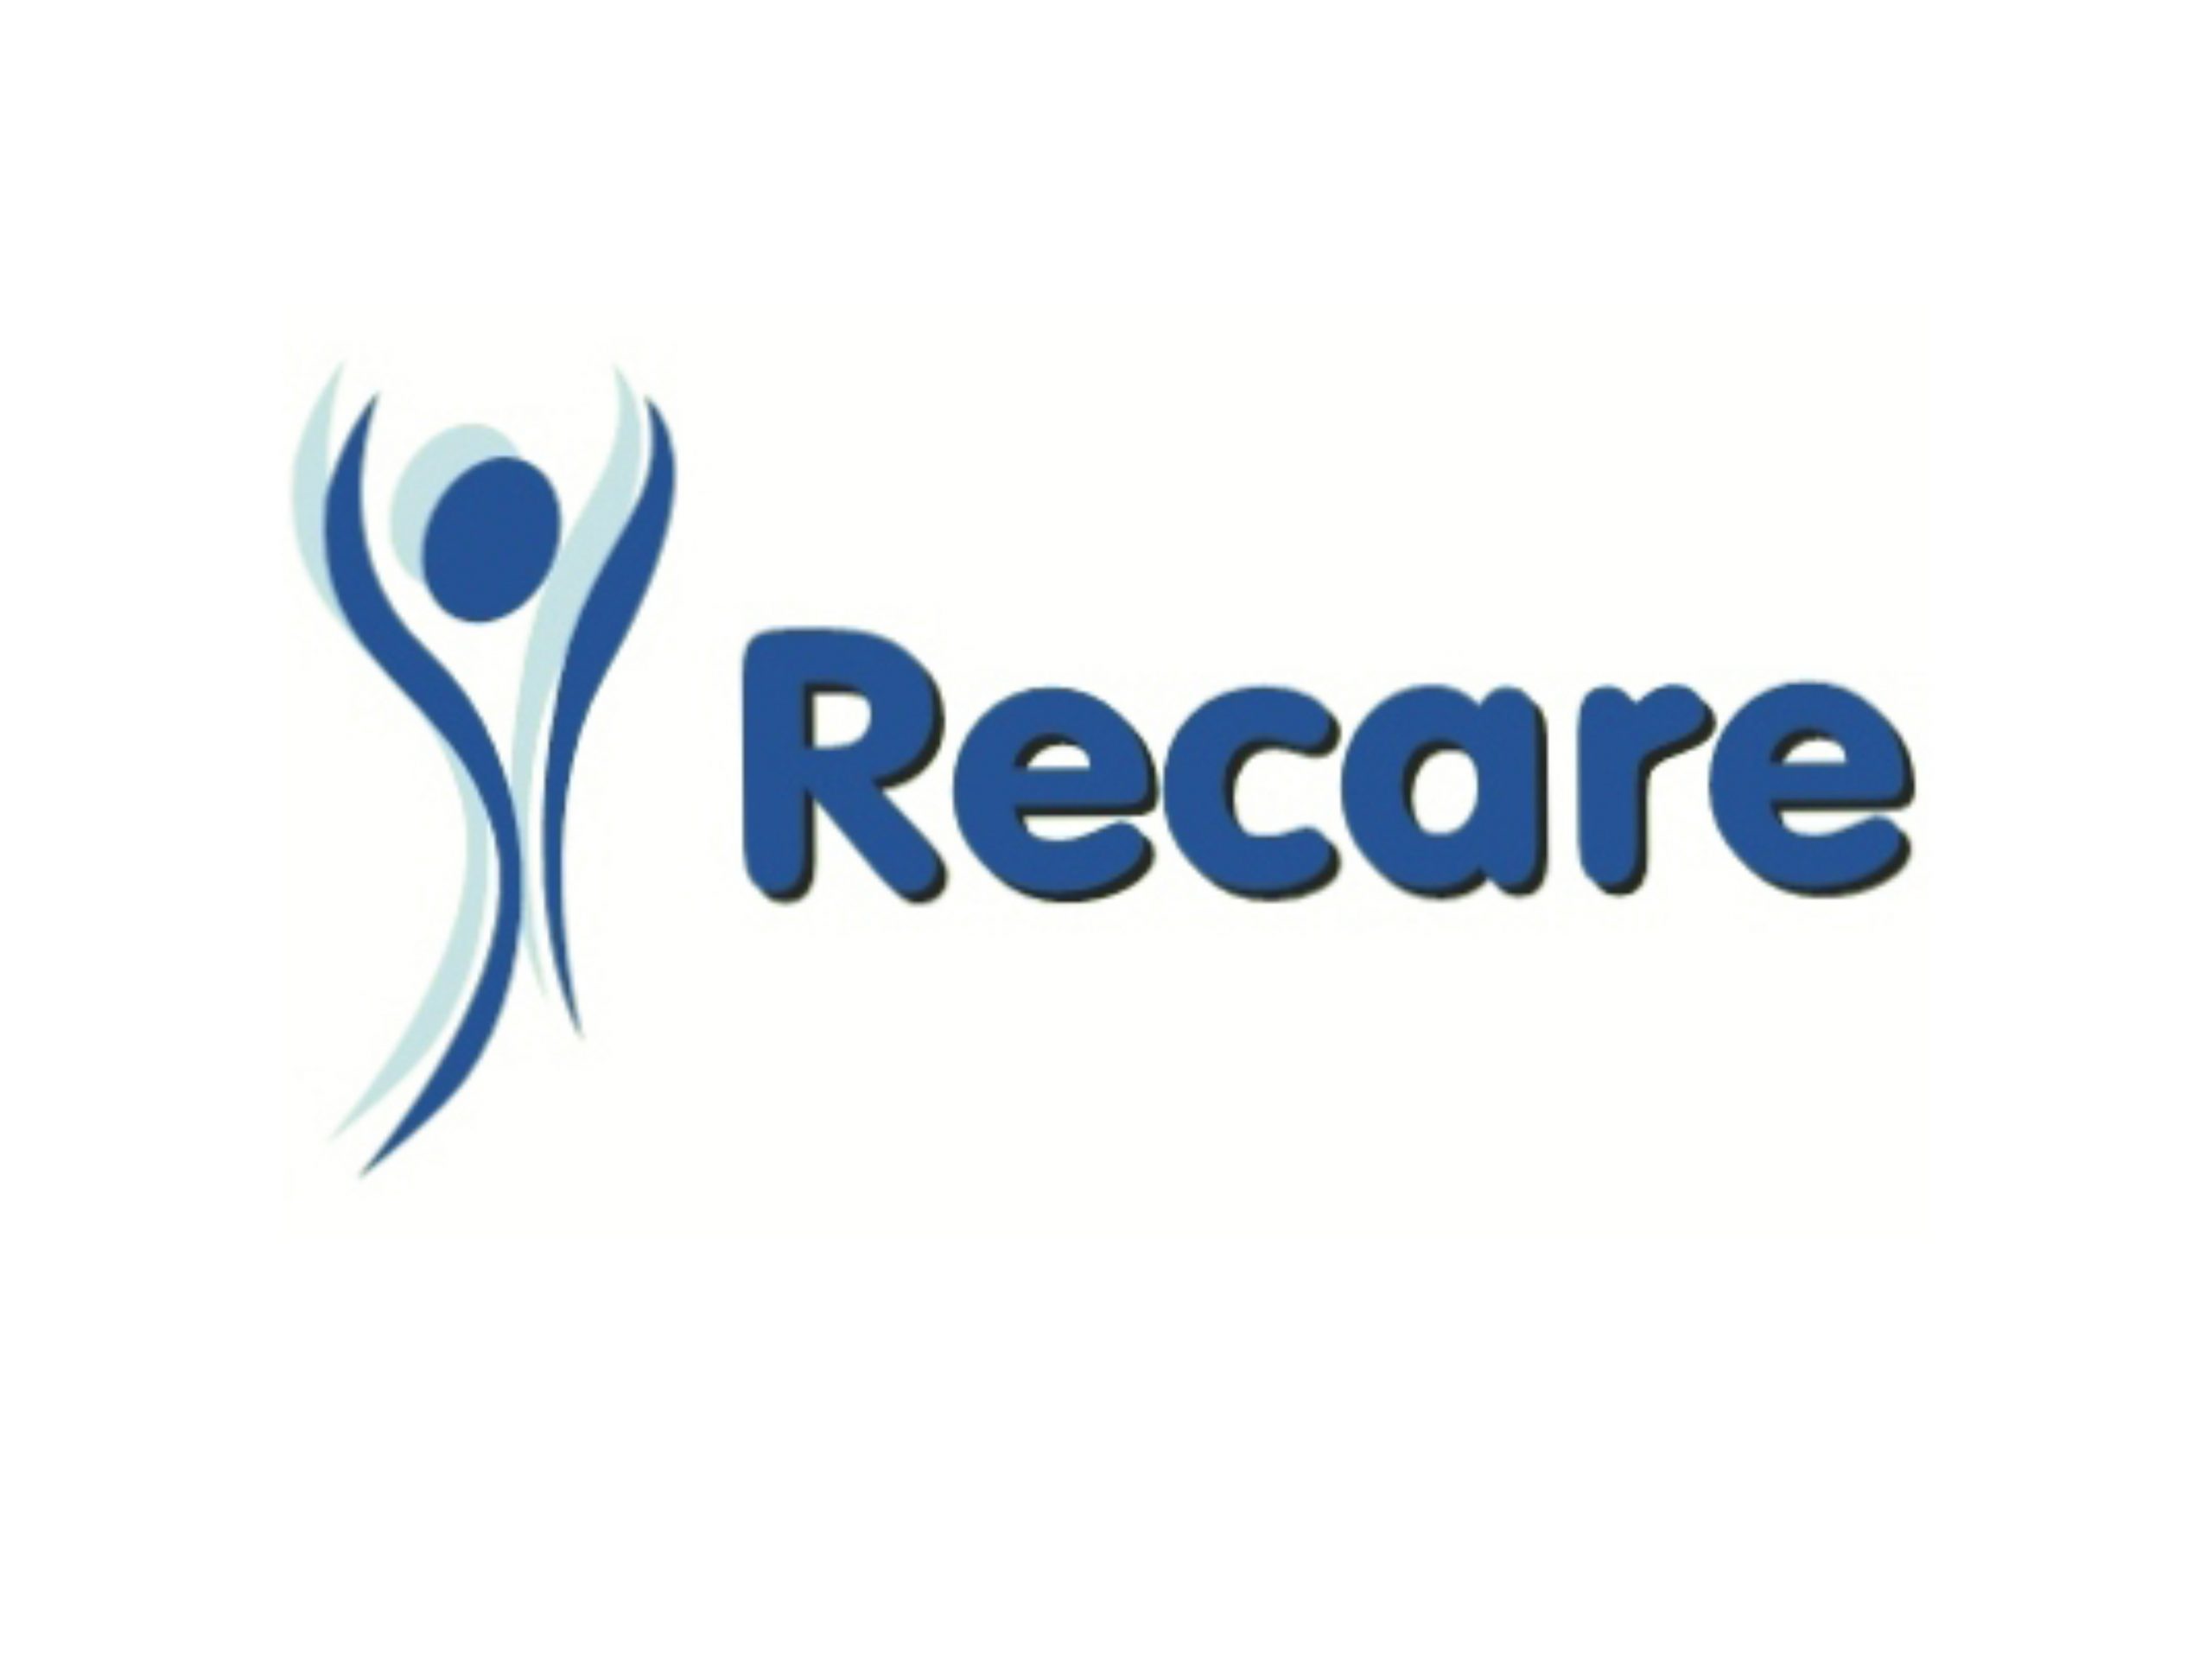 Recare to showcase specialist wheelchairs, seating and clinical assessments at Kidz North exhibition